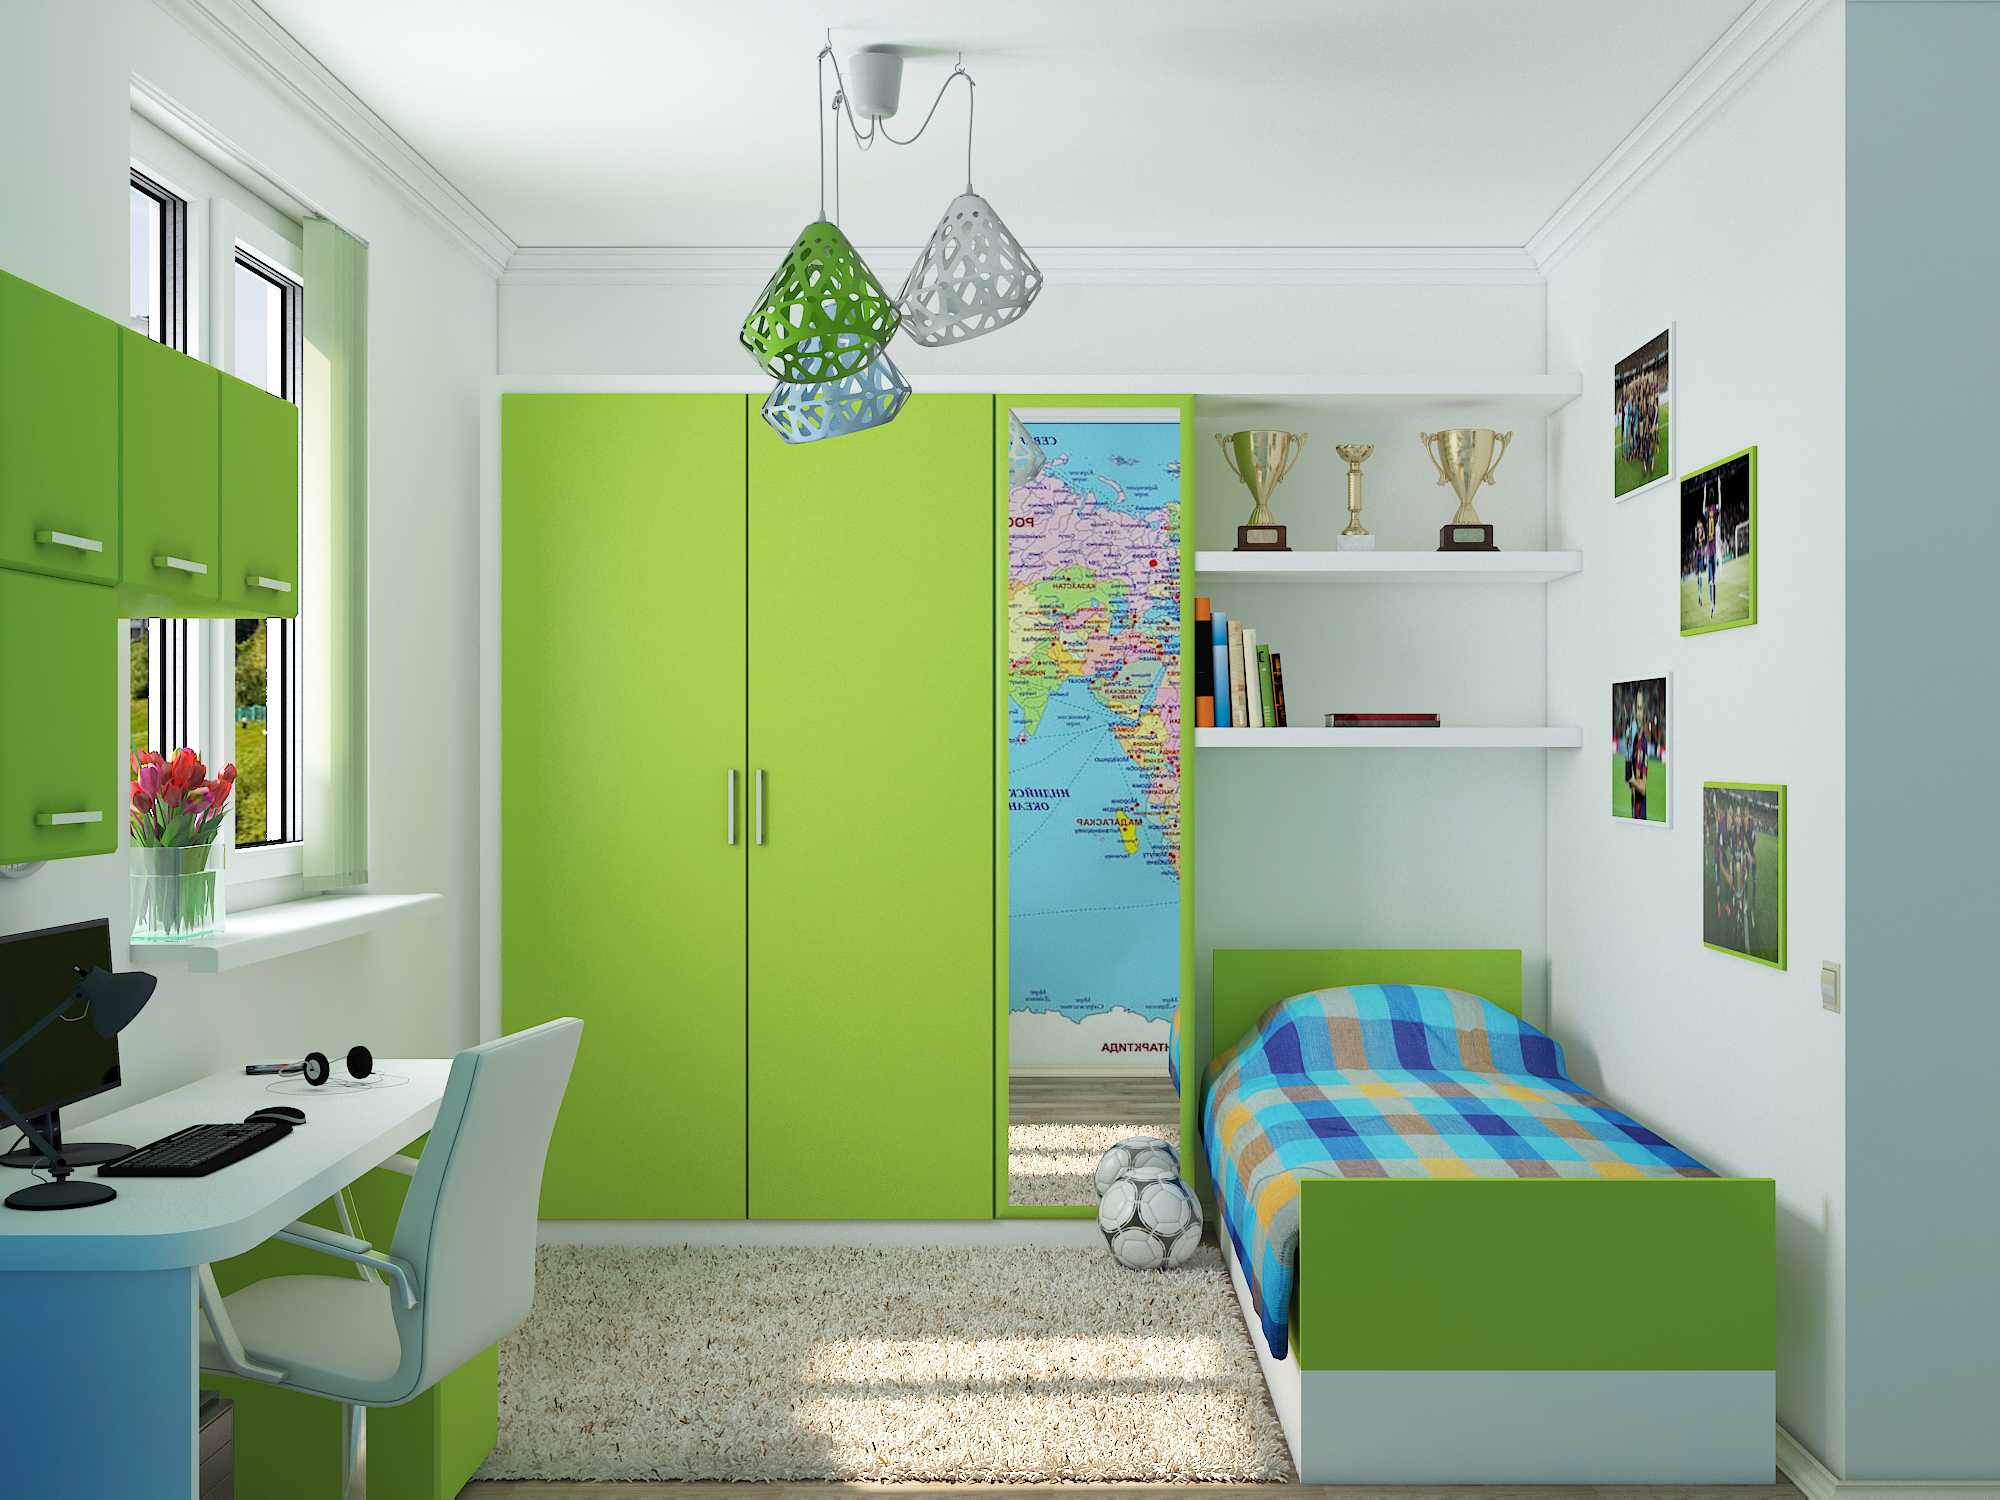 Children's room for a teenager in 3d max vray 3.0 image